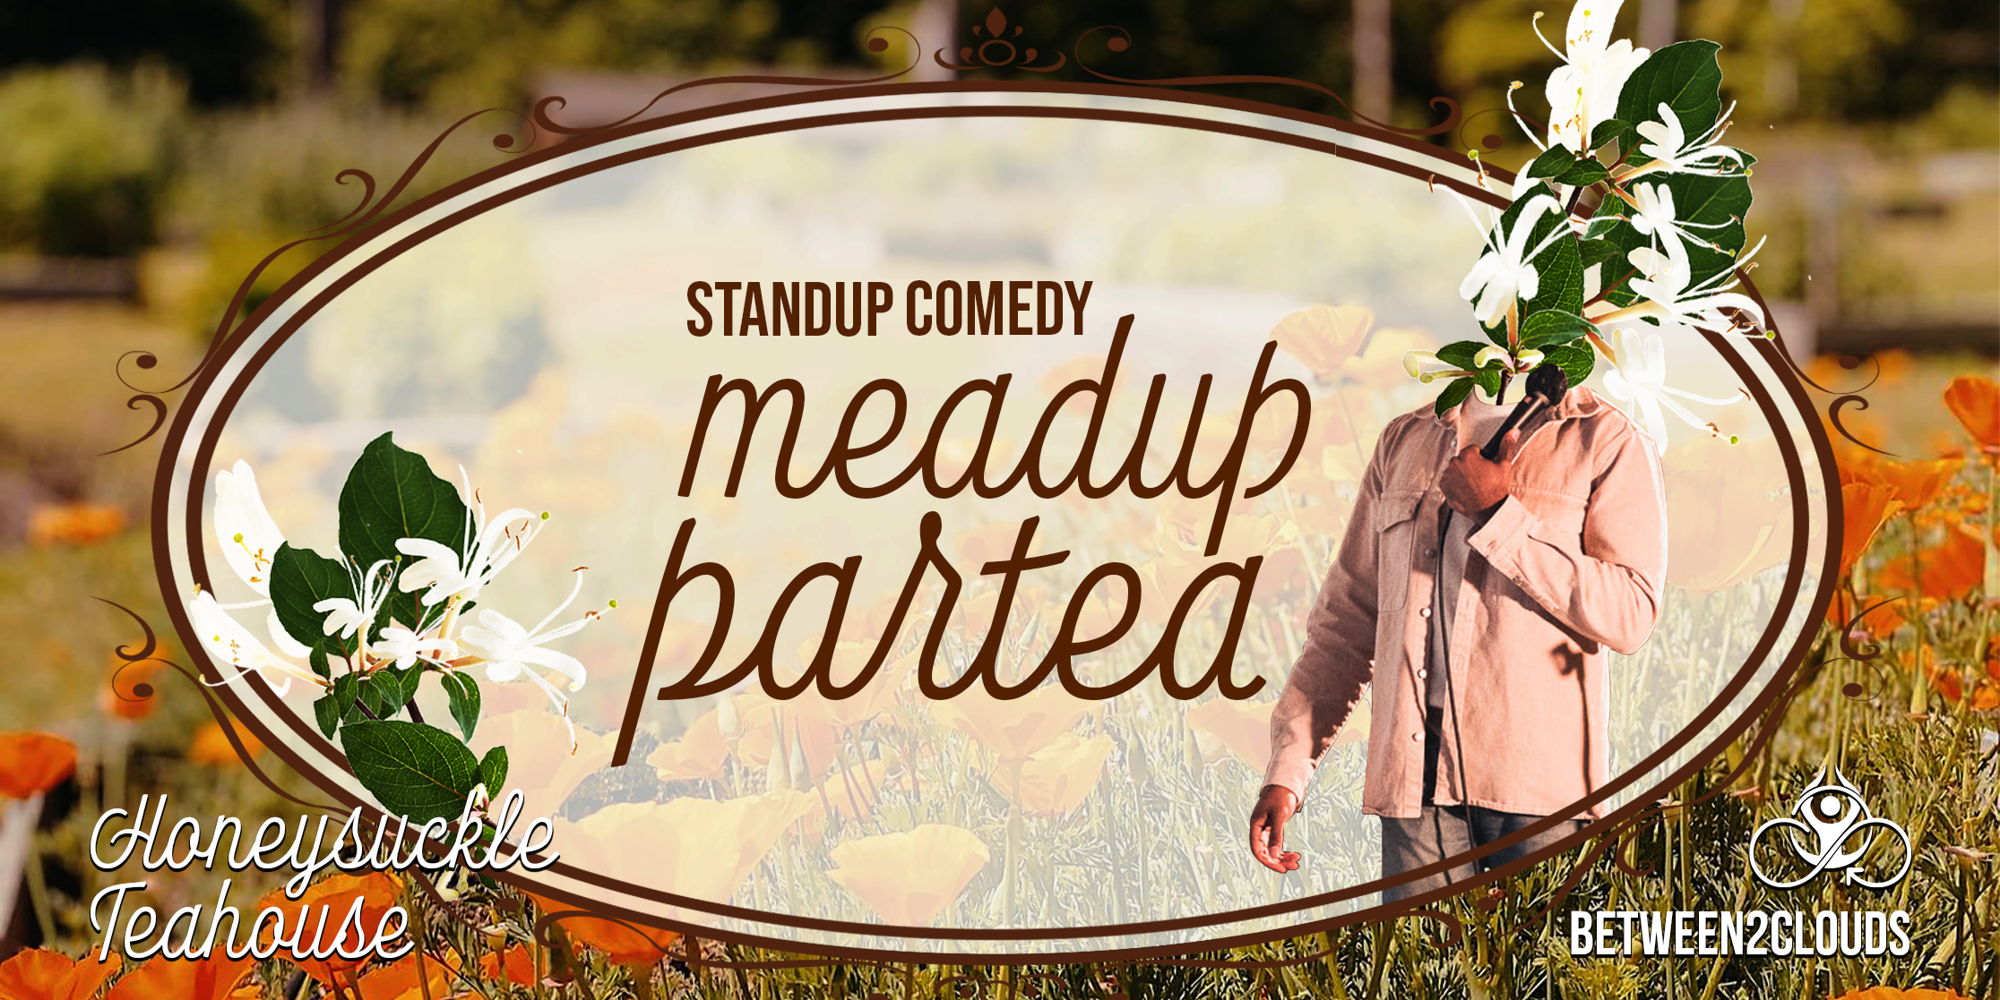 The Stand-Up Comedy Meadup Partea promotional image